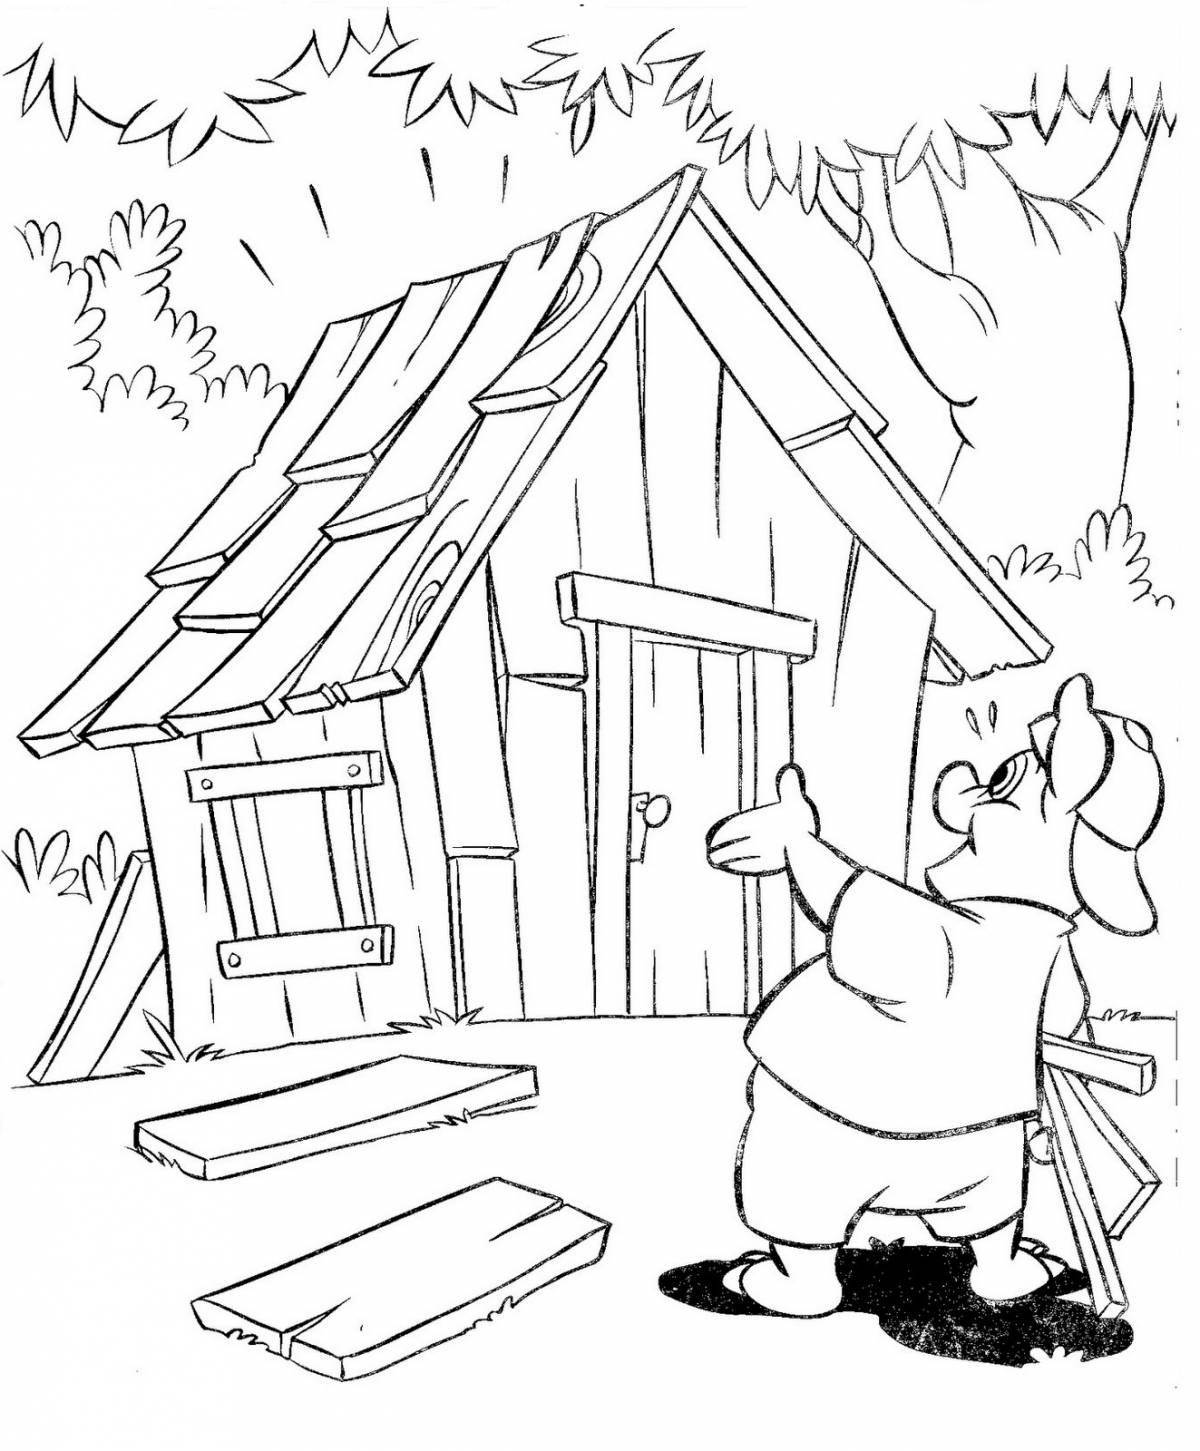 Three little pigs with houses #5